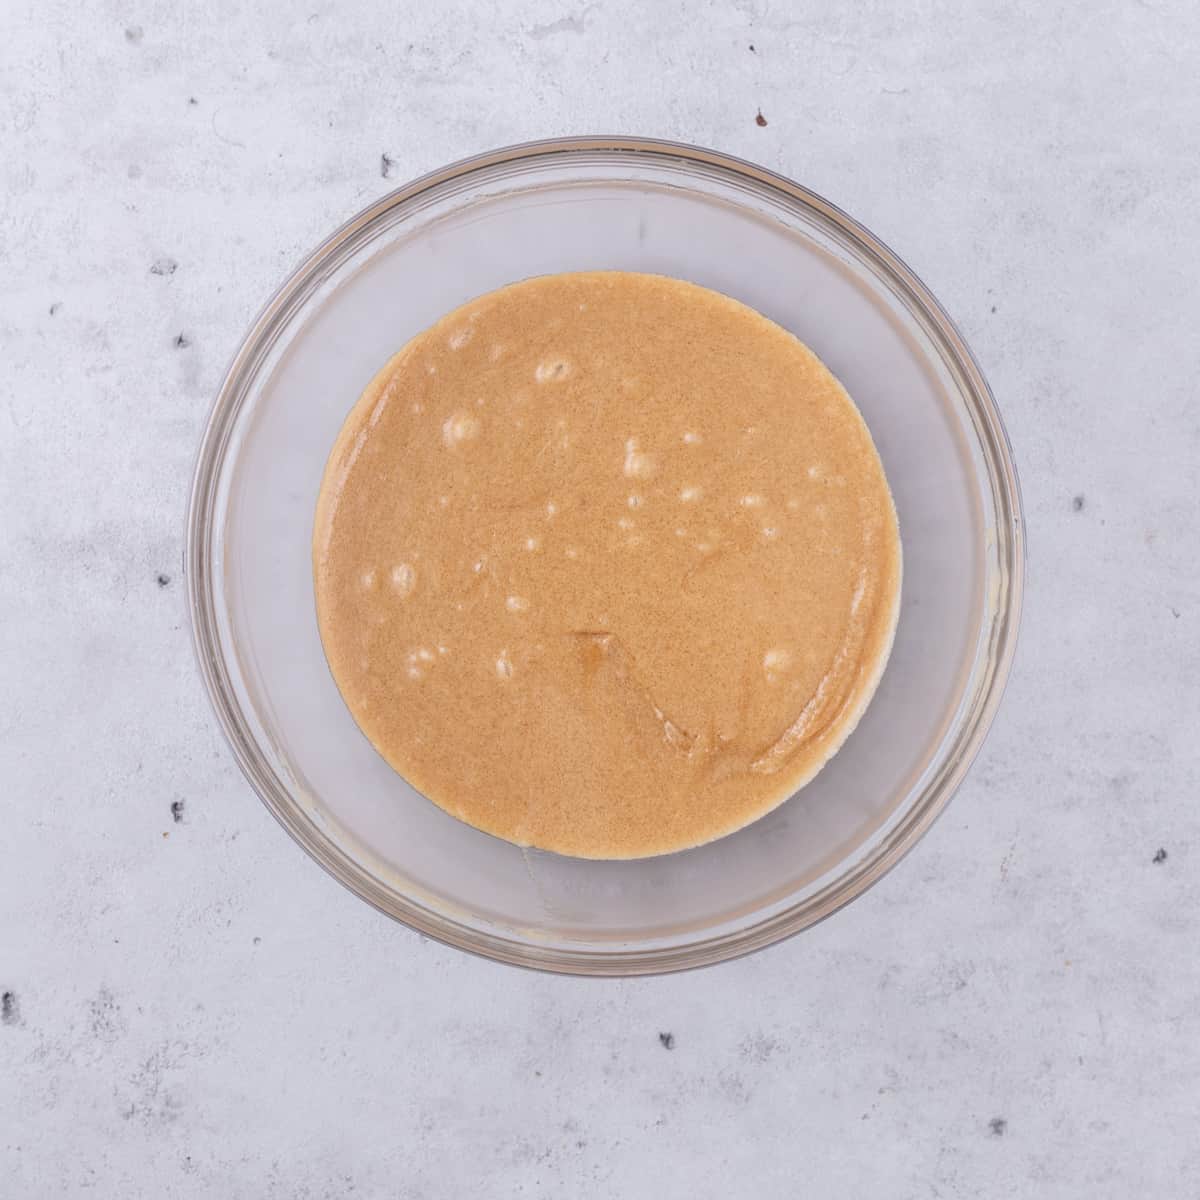 the wet ingredients and brown sugar combined in a glass bowl on a grey background